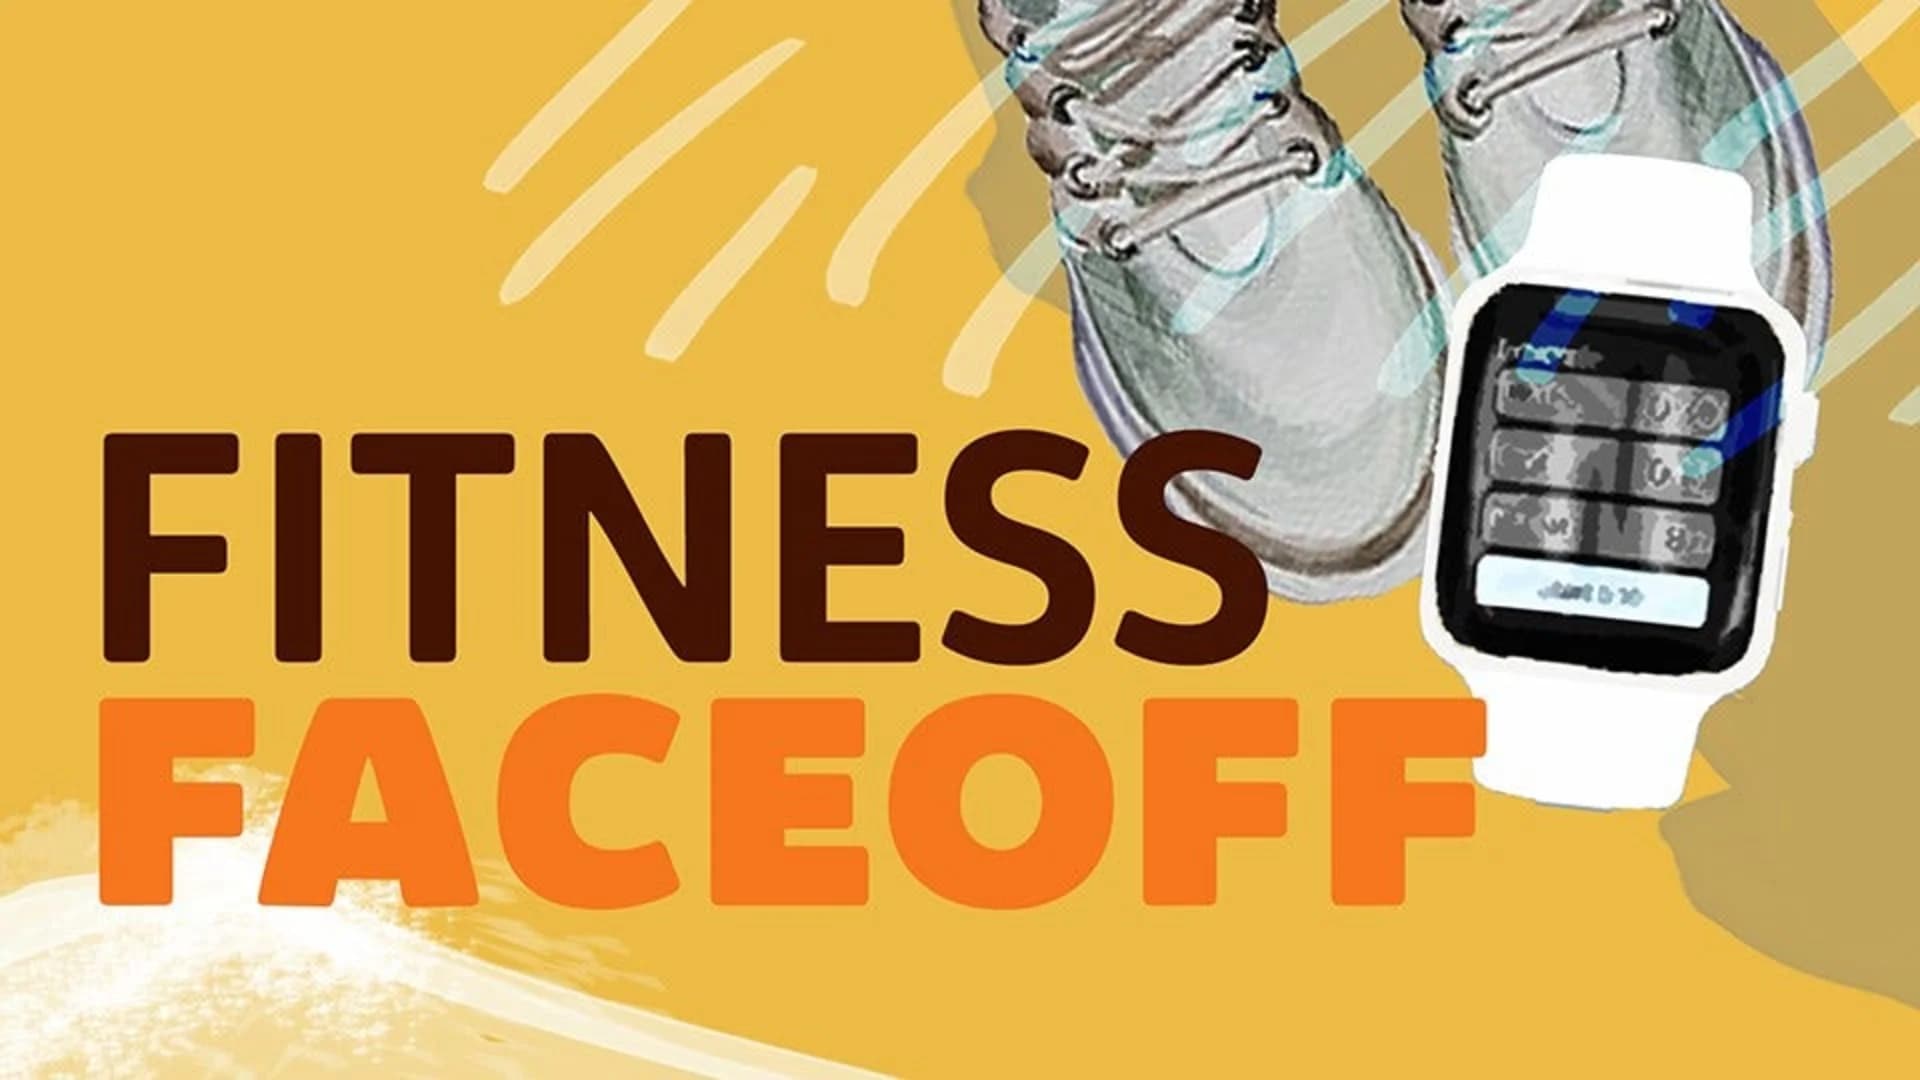 Fitness Face-off crosses the finish line in New Jersey